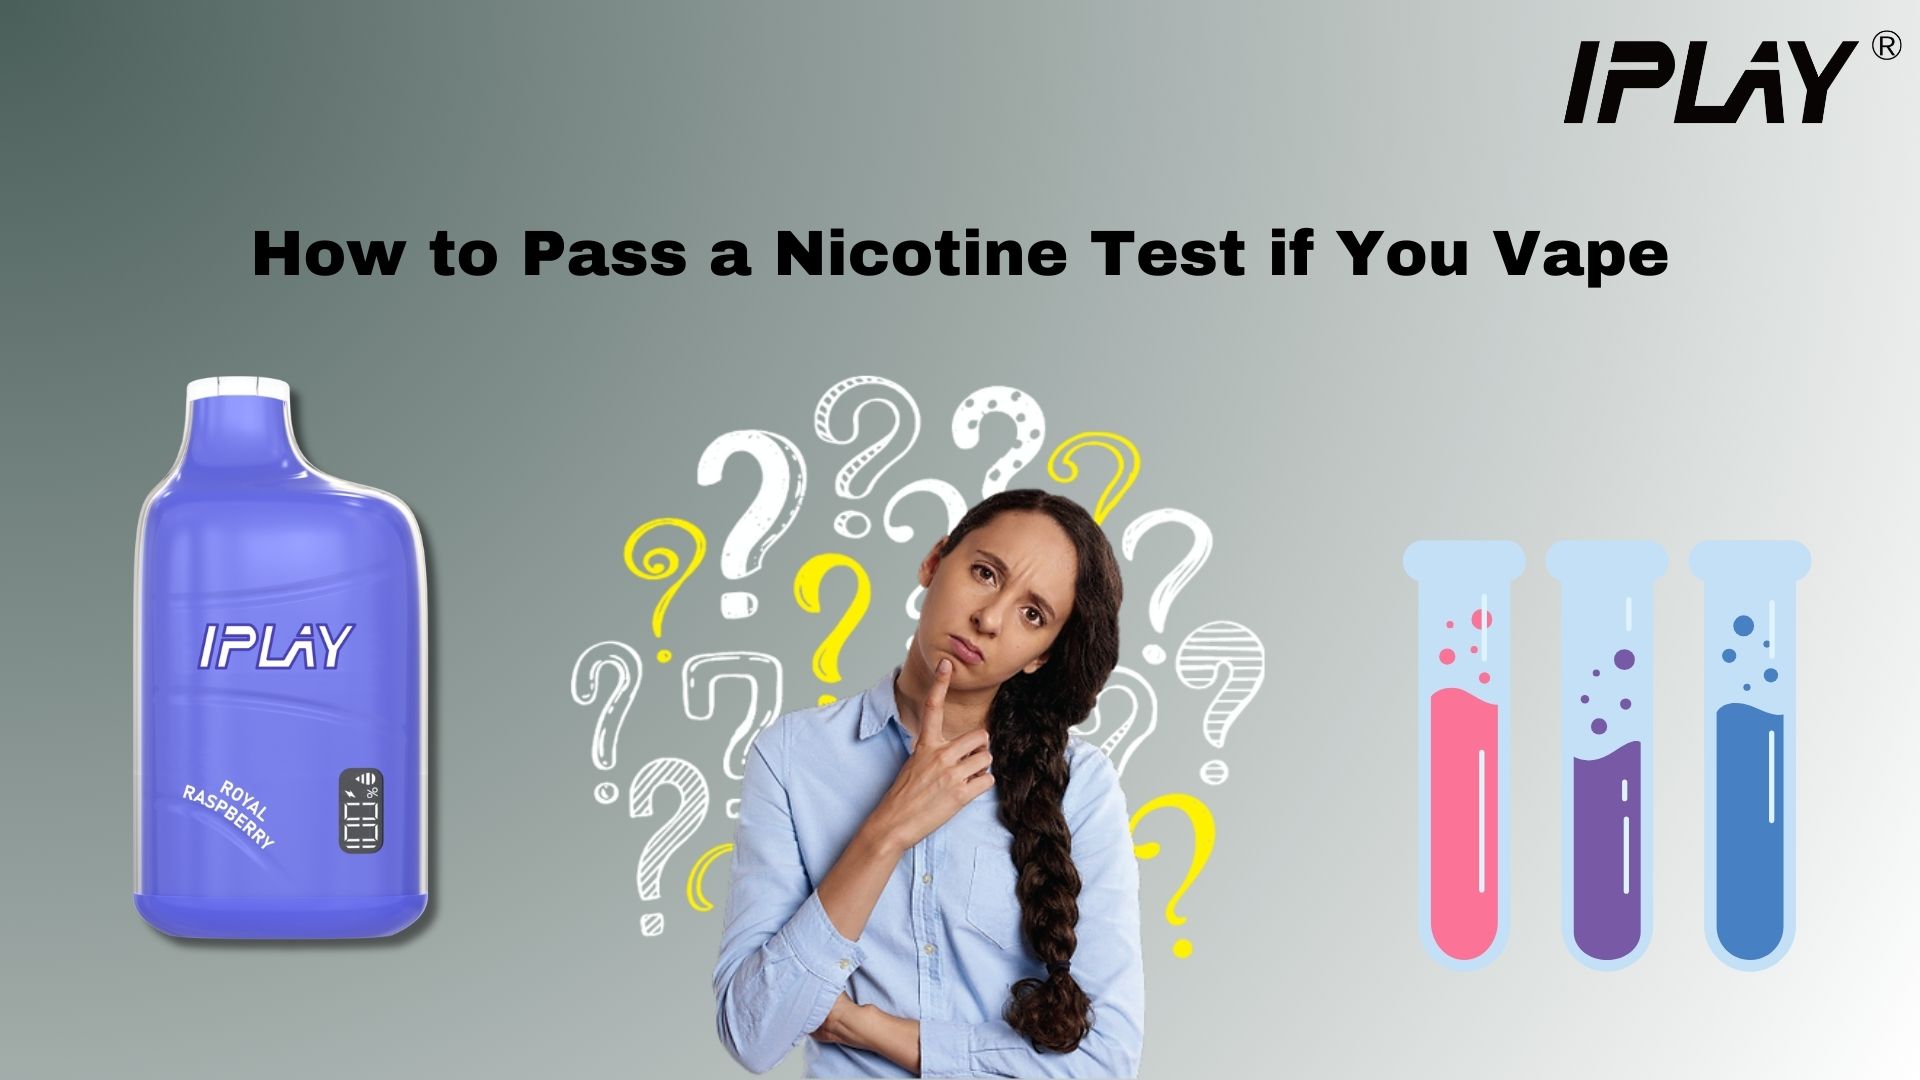 How to Pass a Nicotine Test if You Vape